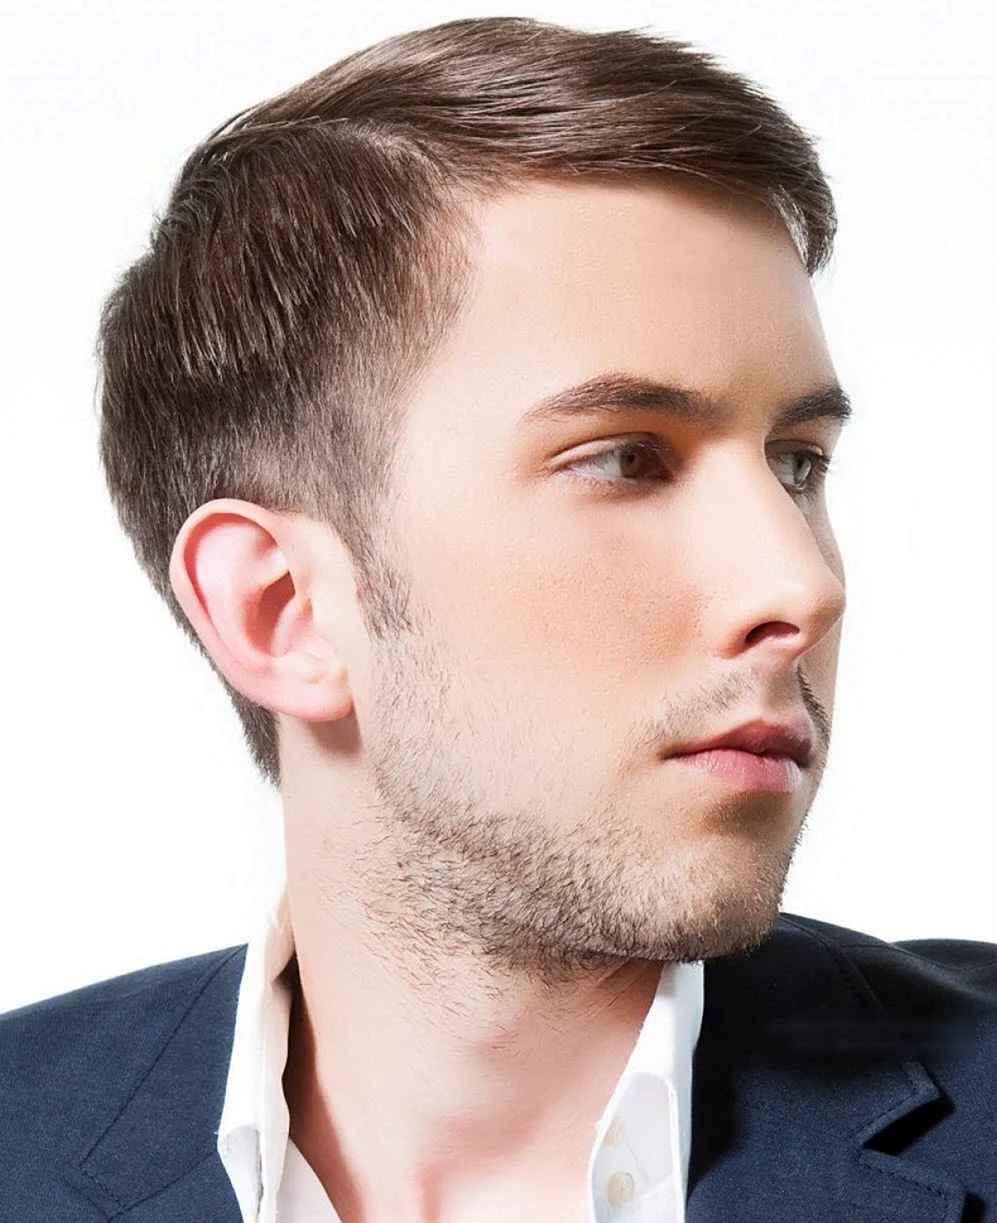 Haircuts for professional men